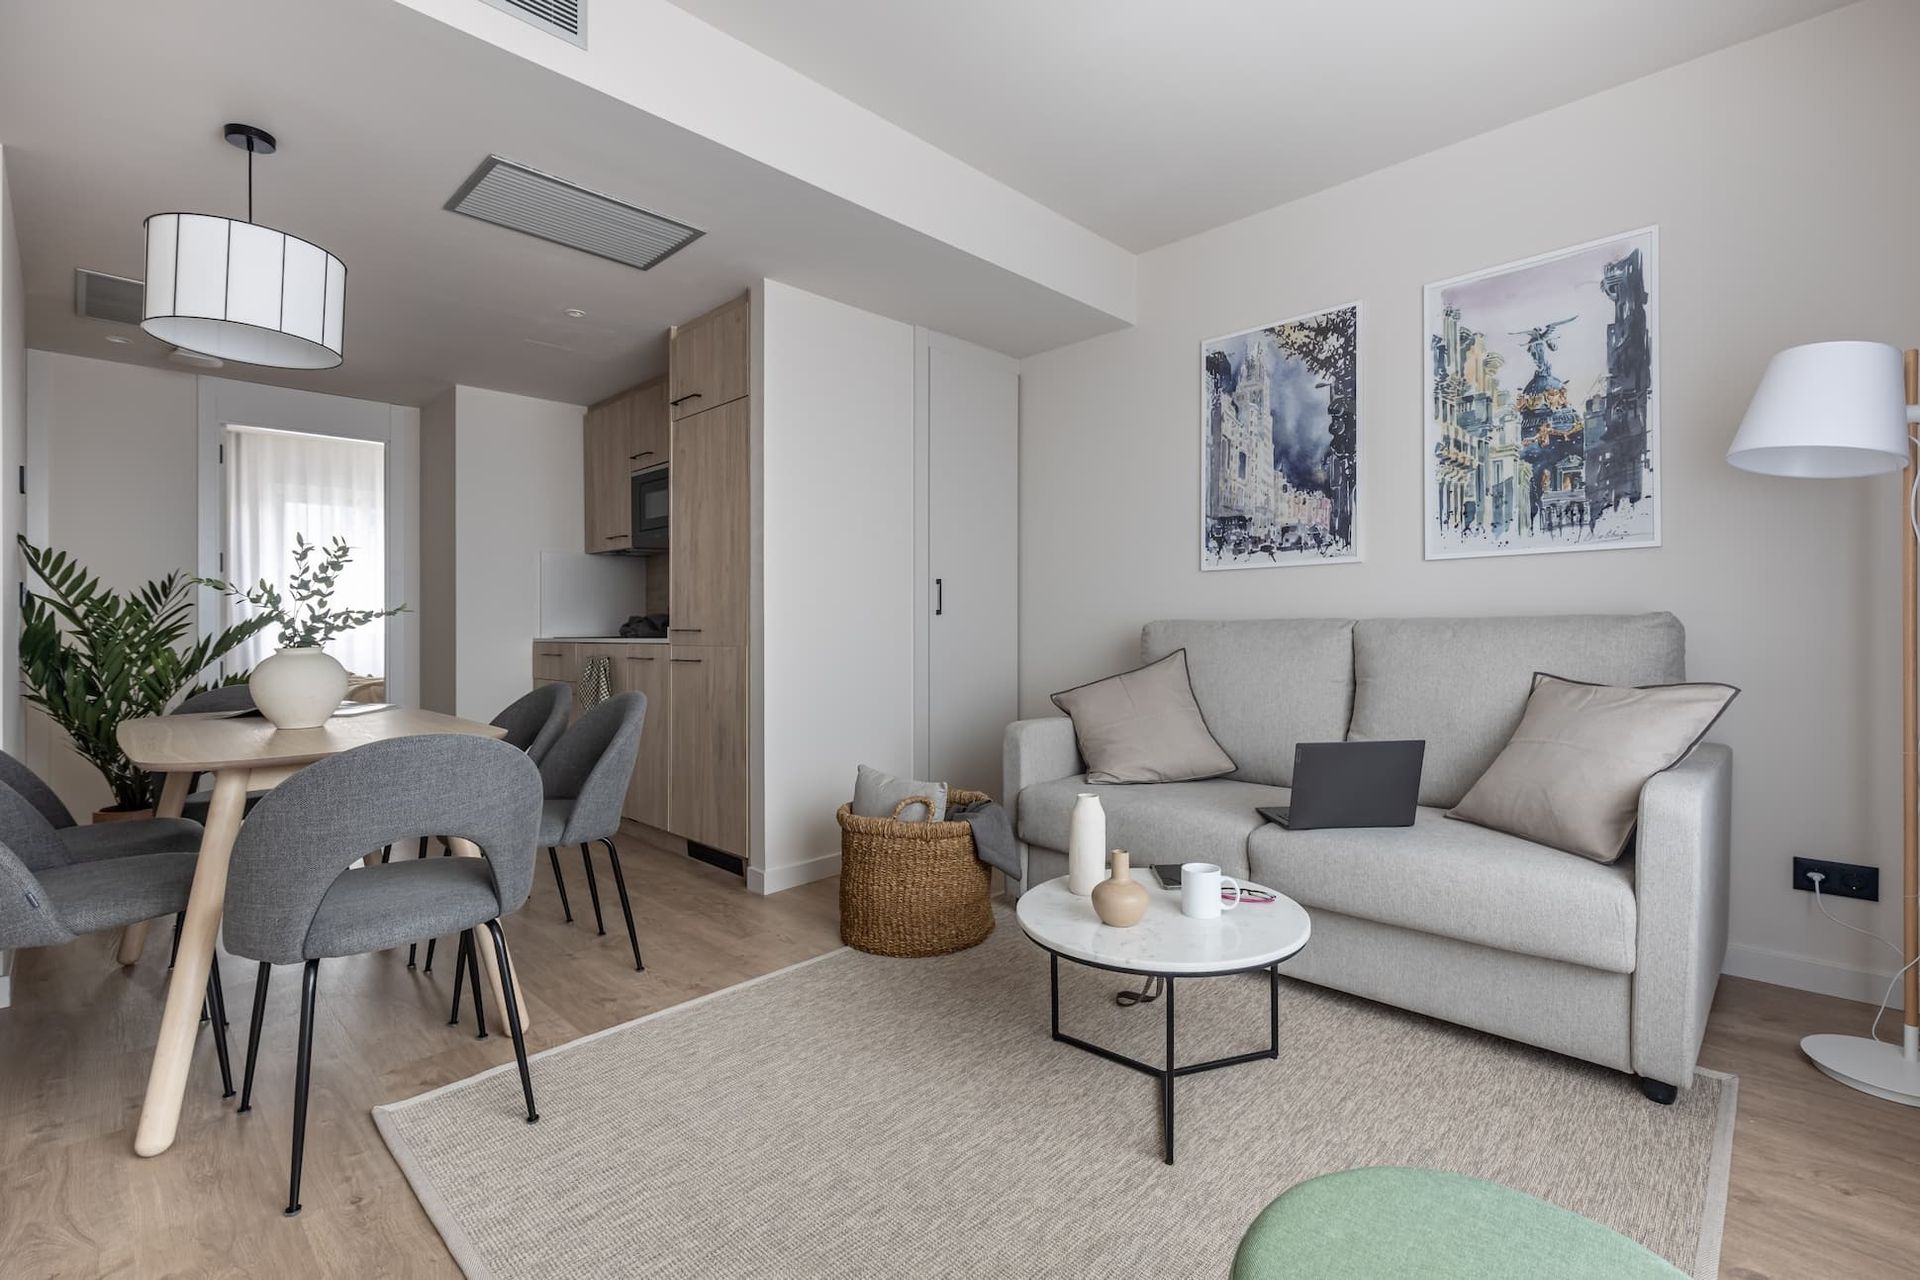 2 bedroom apartment in Madrid Chamberí